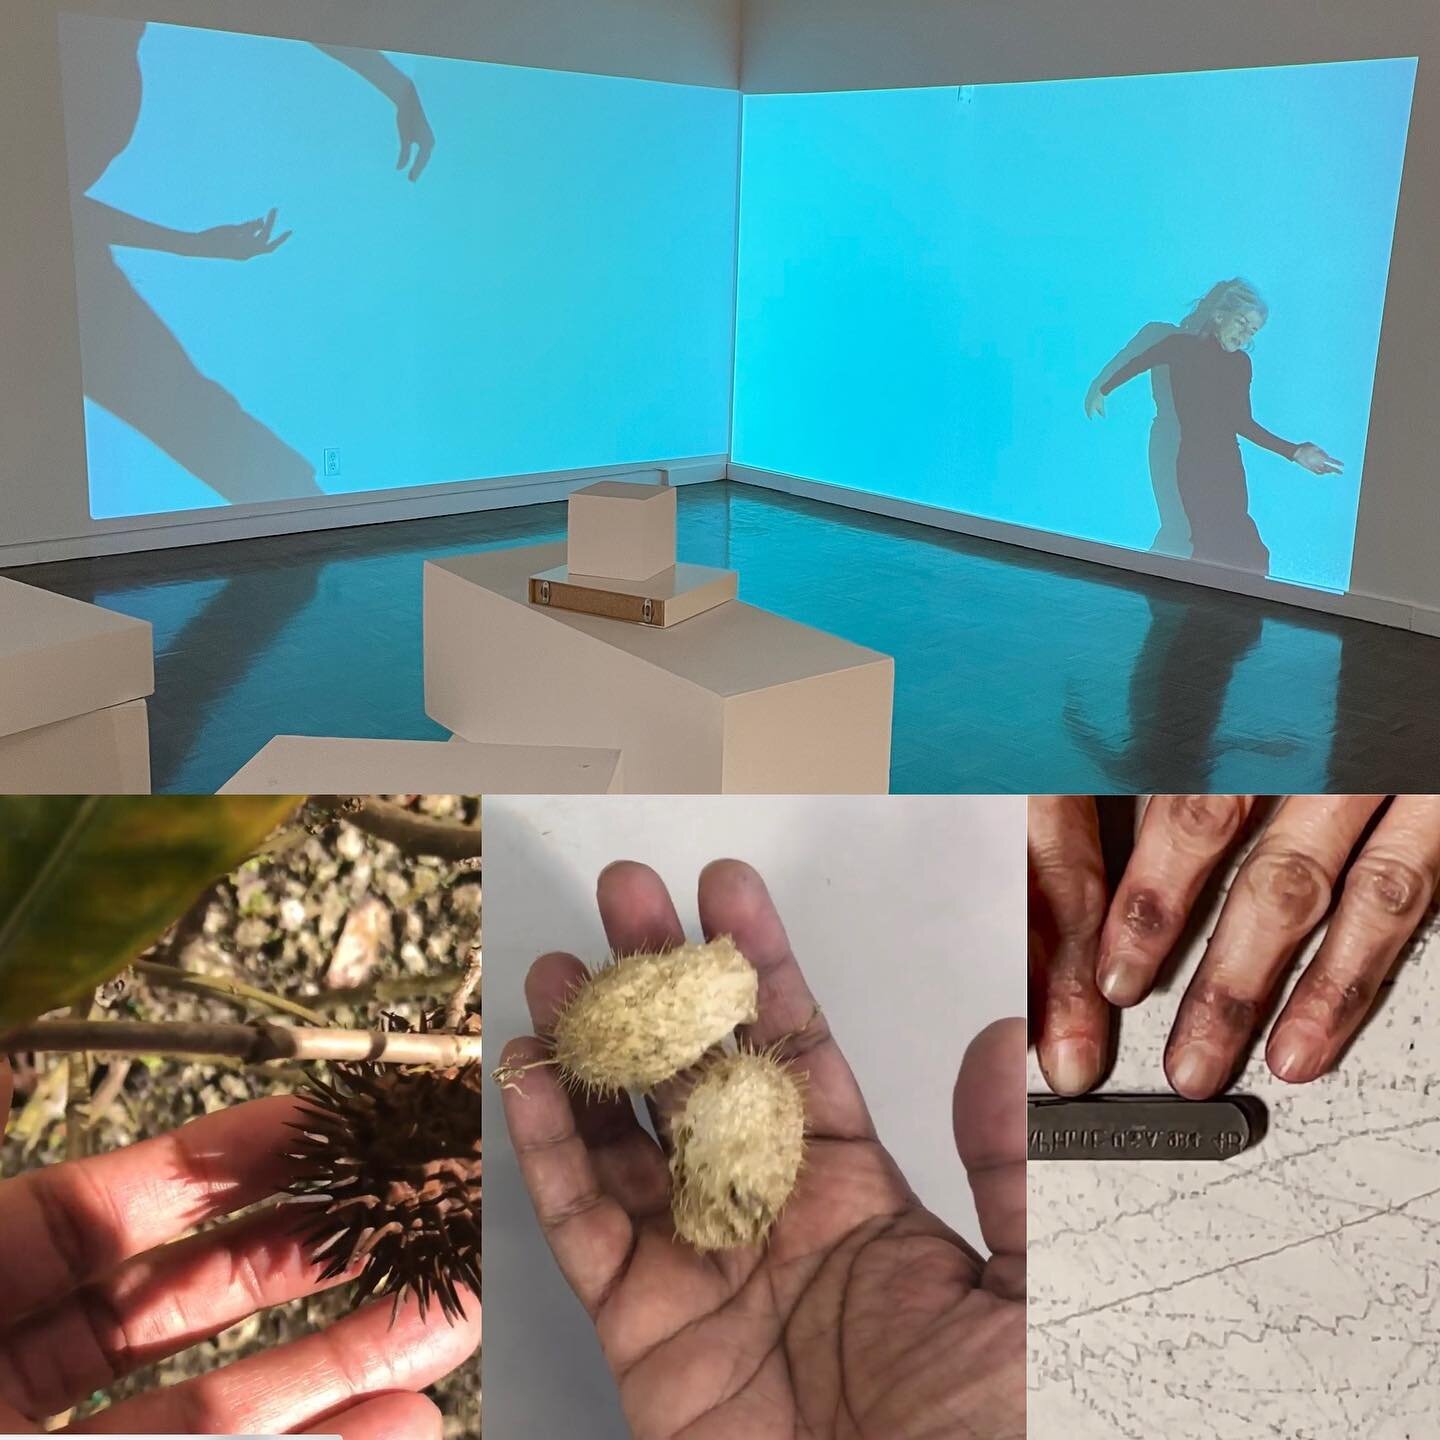 Join us tonite at 7:30pm CT (5:30PT, 8:30pmET) 
.
Zoom Link In Bio! 

We are having an artist talk and Q&amp;A with the Migrating Gestures artists: with @nirmal.raja @portia53211 @nykoli.koslow @barry_paul_clark @thisisparadisehome @keghaznavi 

Also